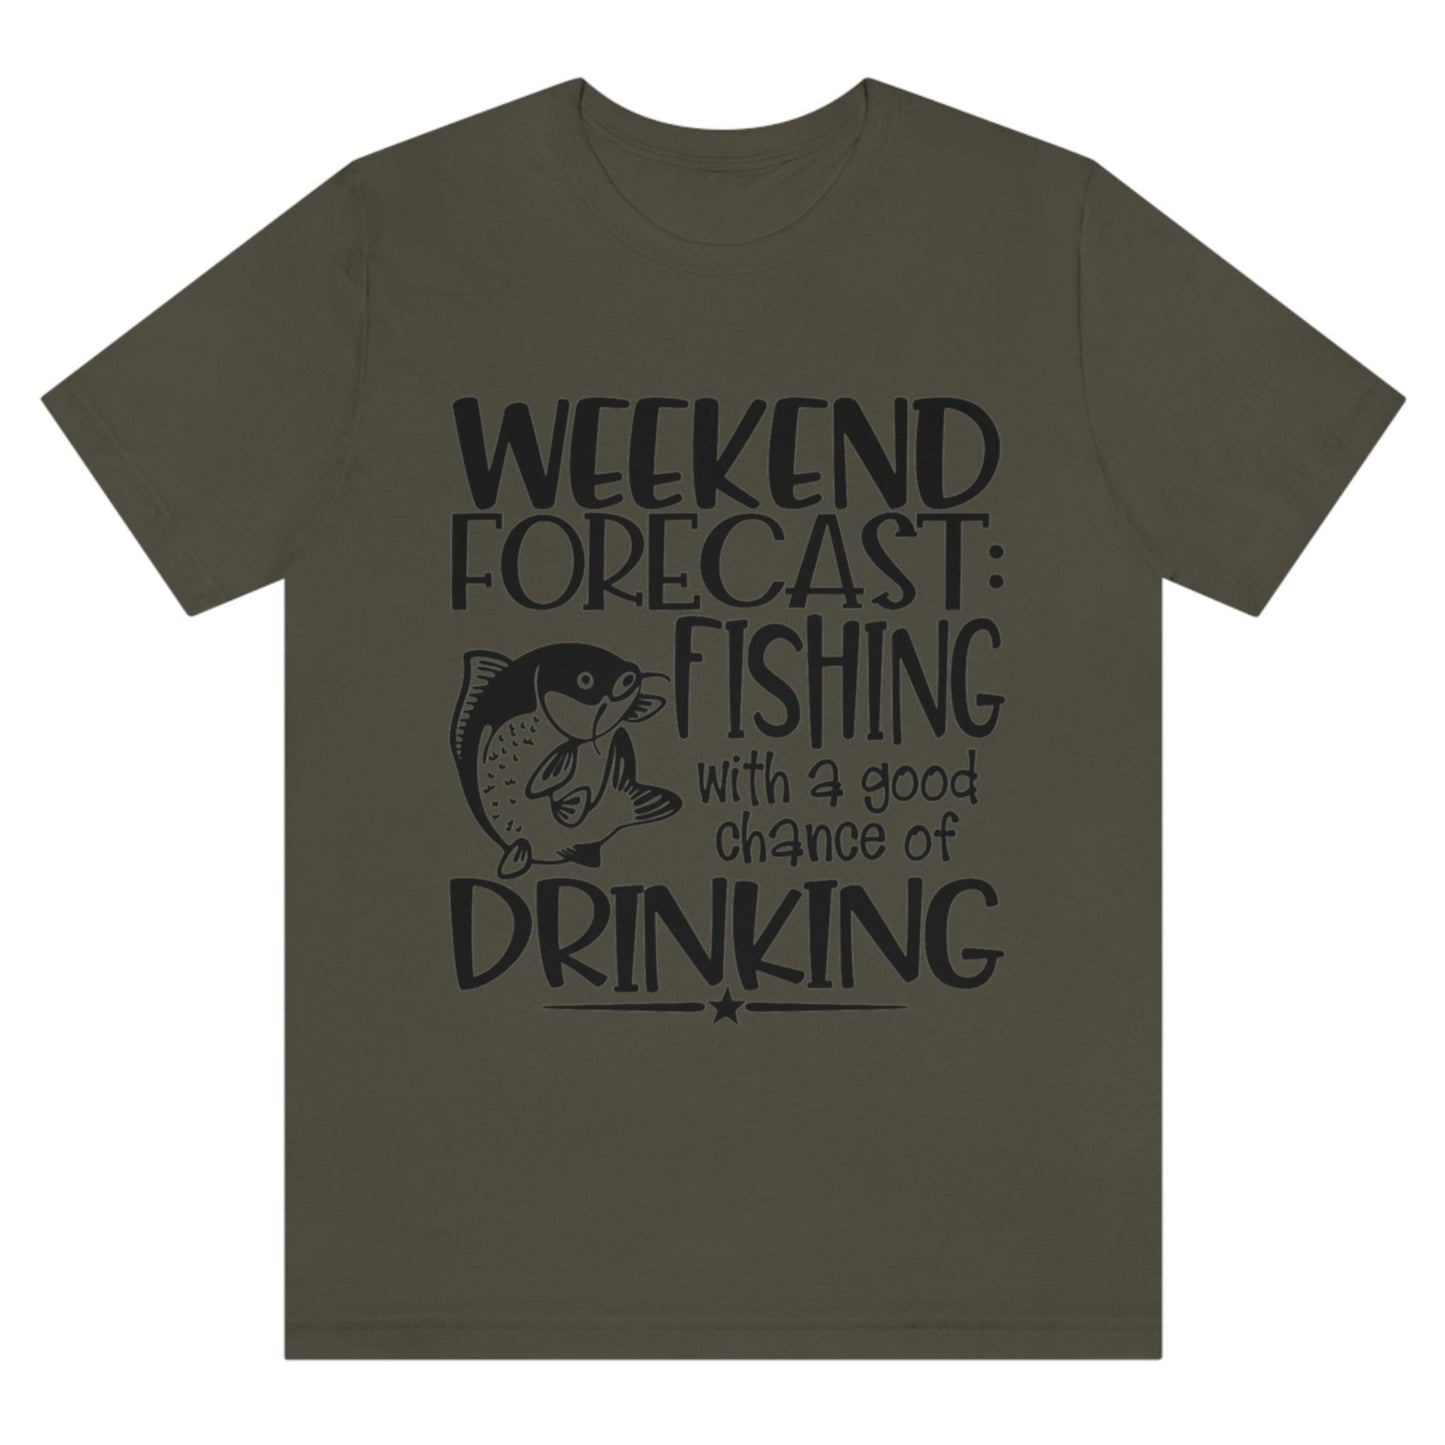 weekend-forecast-fishing-with-a-good-chance-of-drinking-army-green-t-shirt